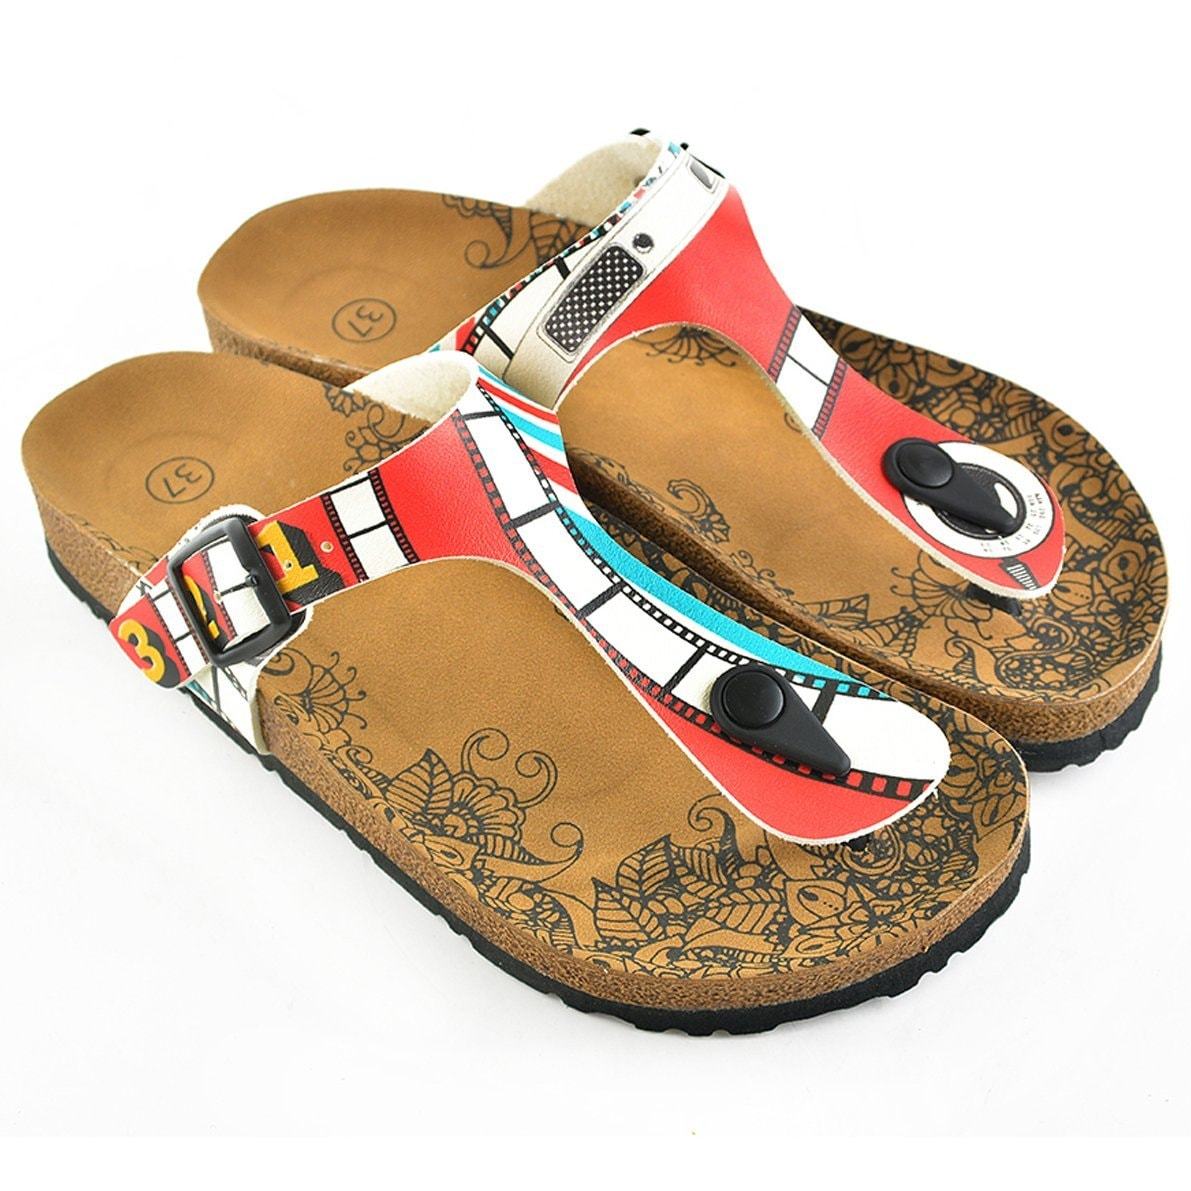 Red, Blue and White Strip and Camera Patterned Sandal - CAL509